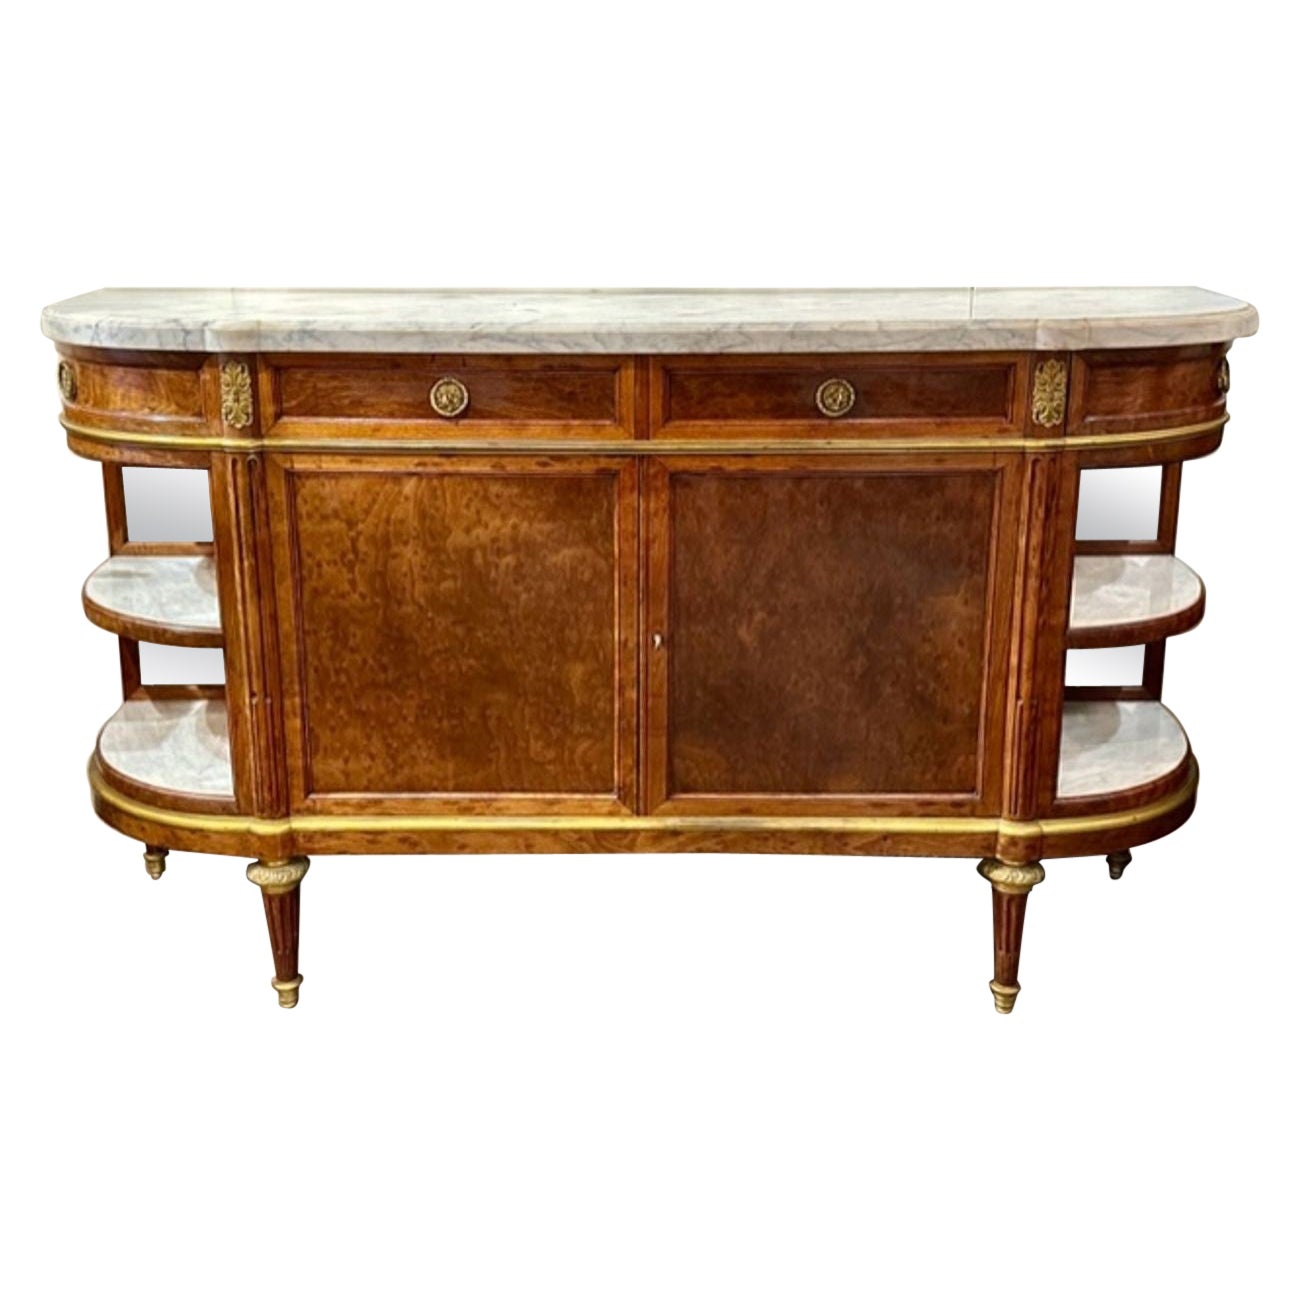 19th Century French Louis XVI Walnut Server with Carrara Marble Top